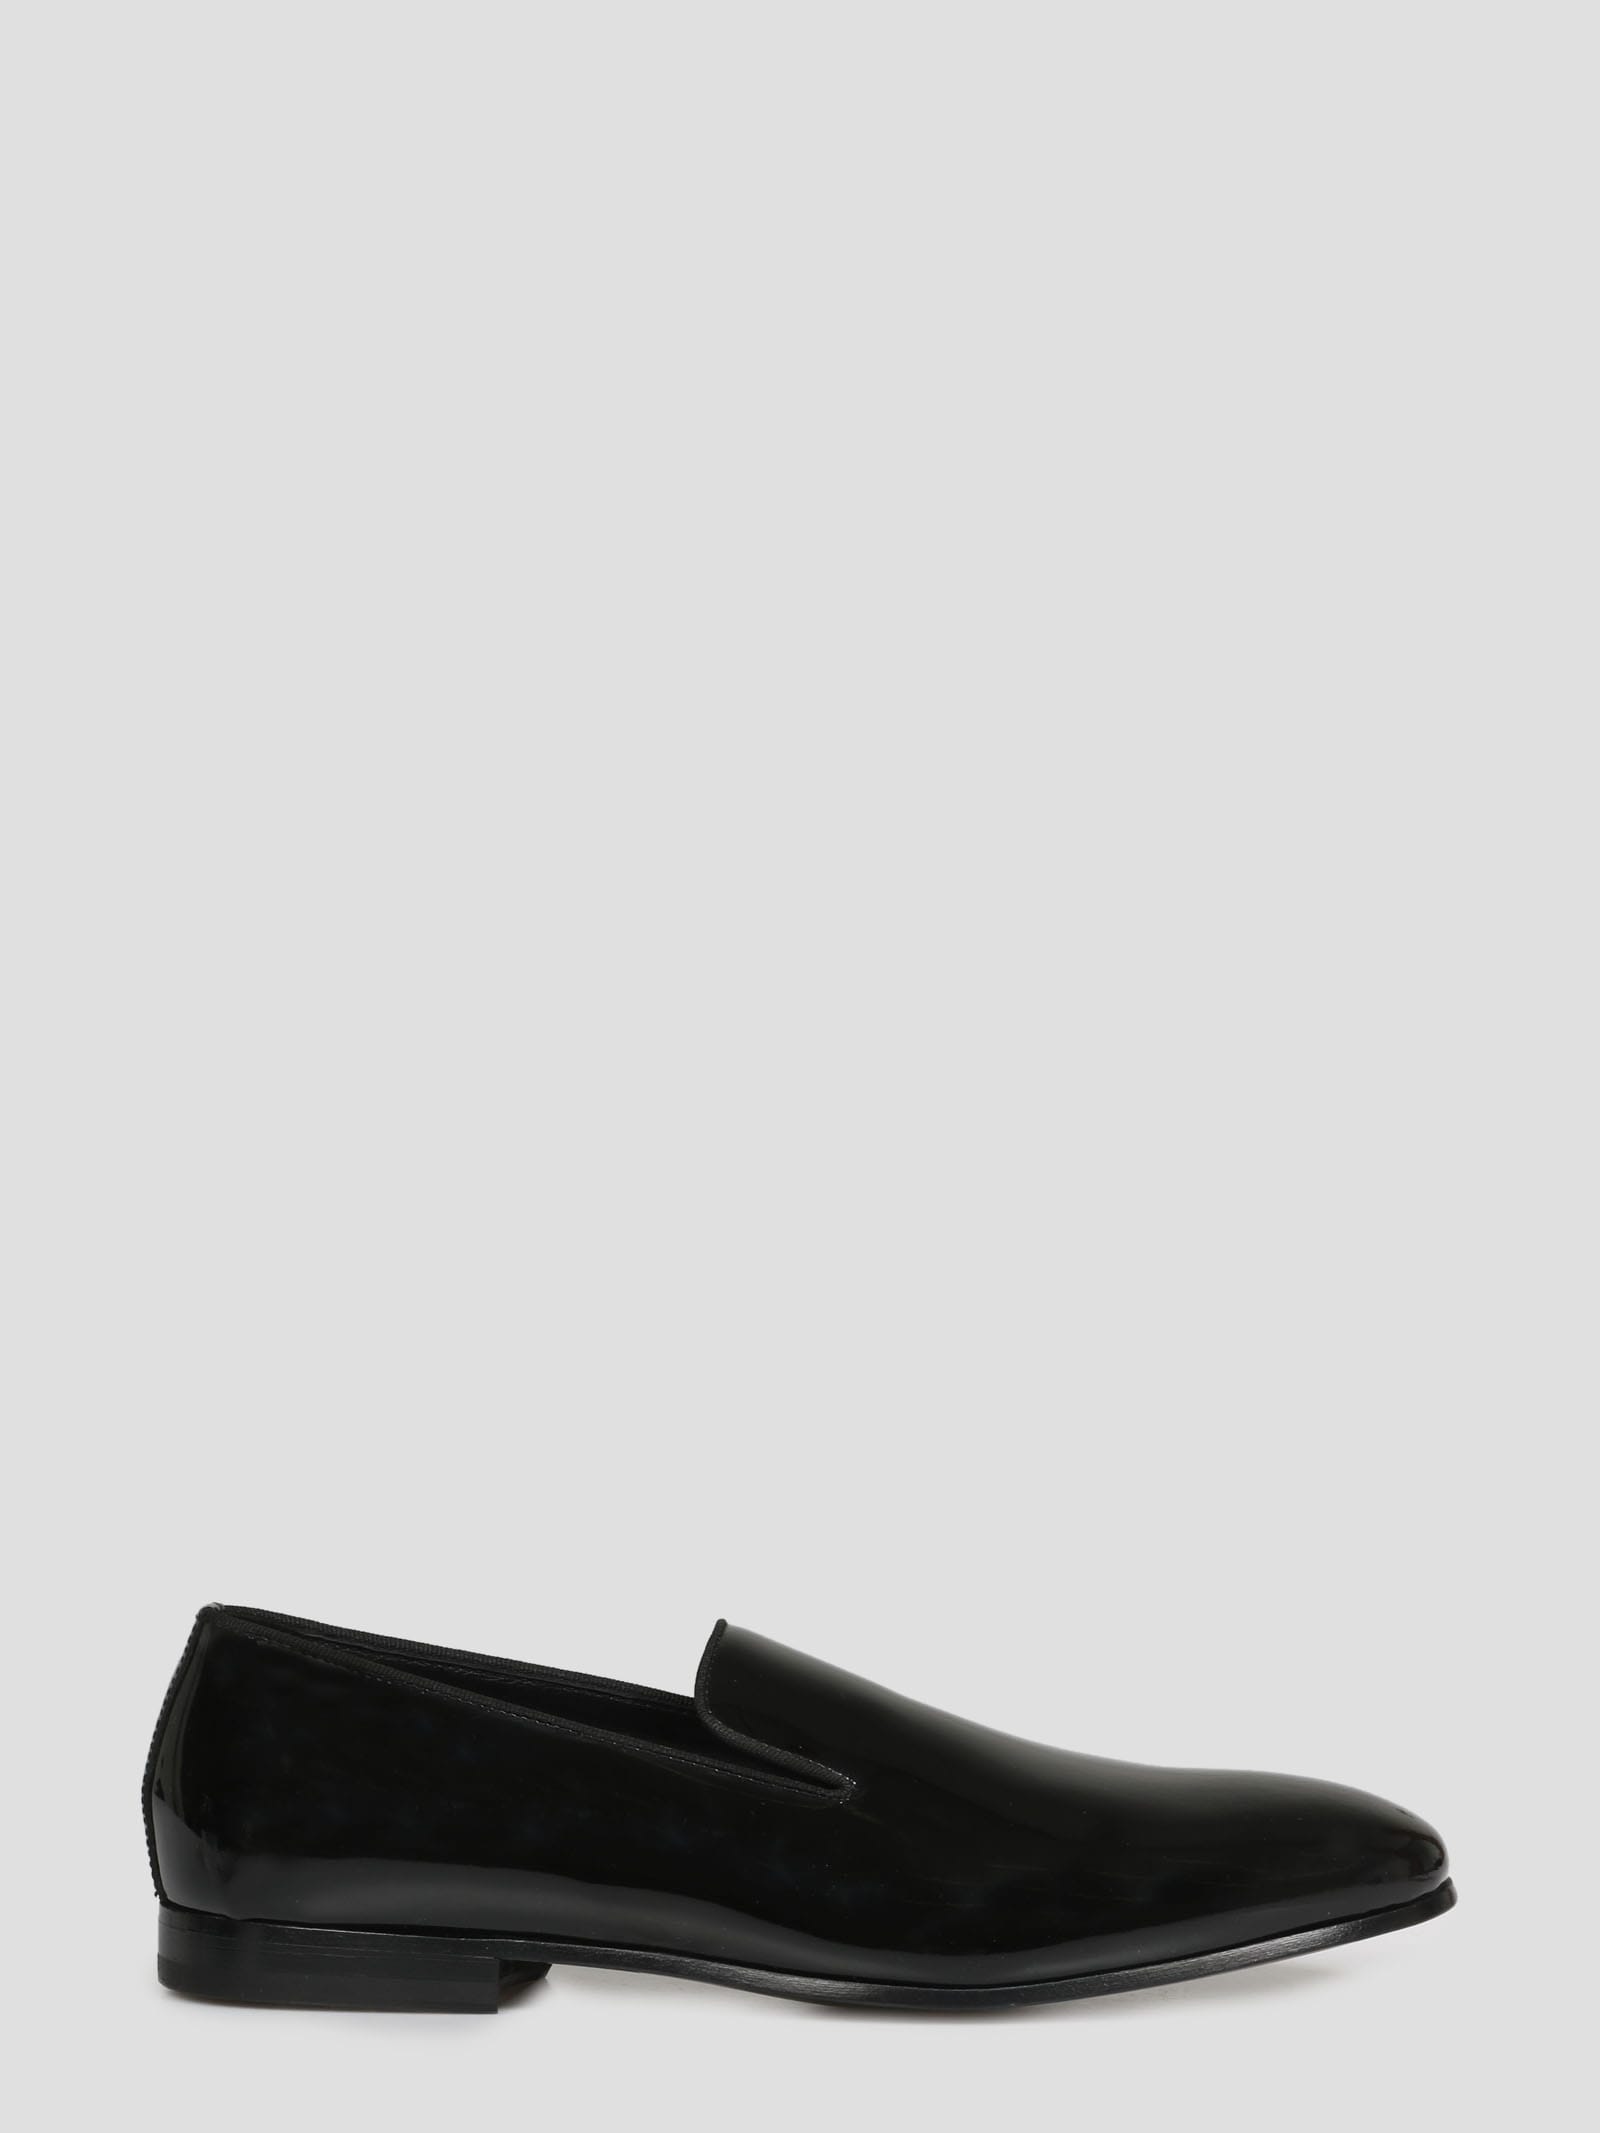 Doucal's Patent Leather Loafer